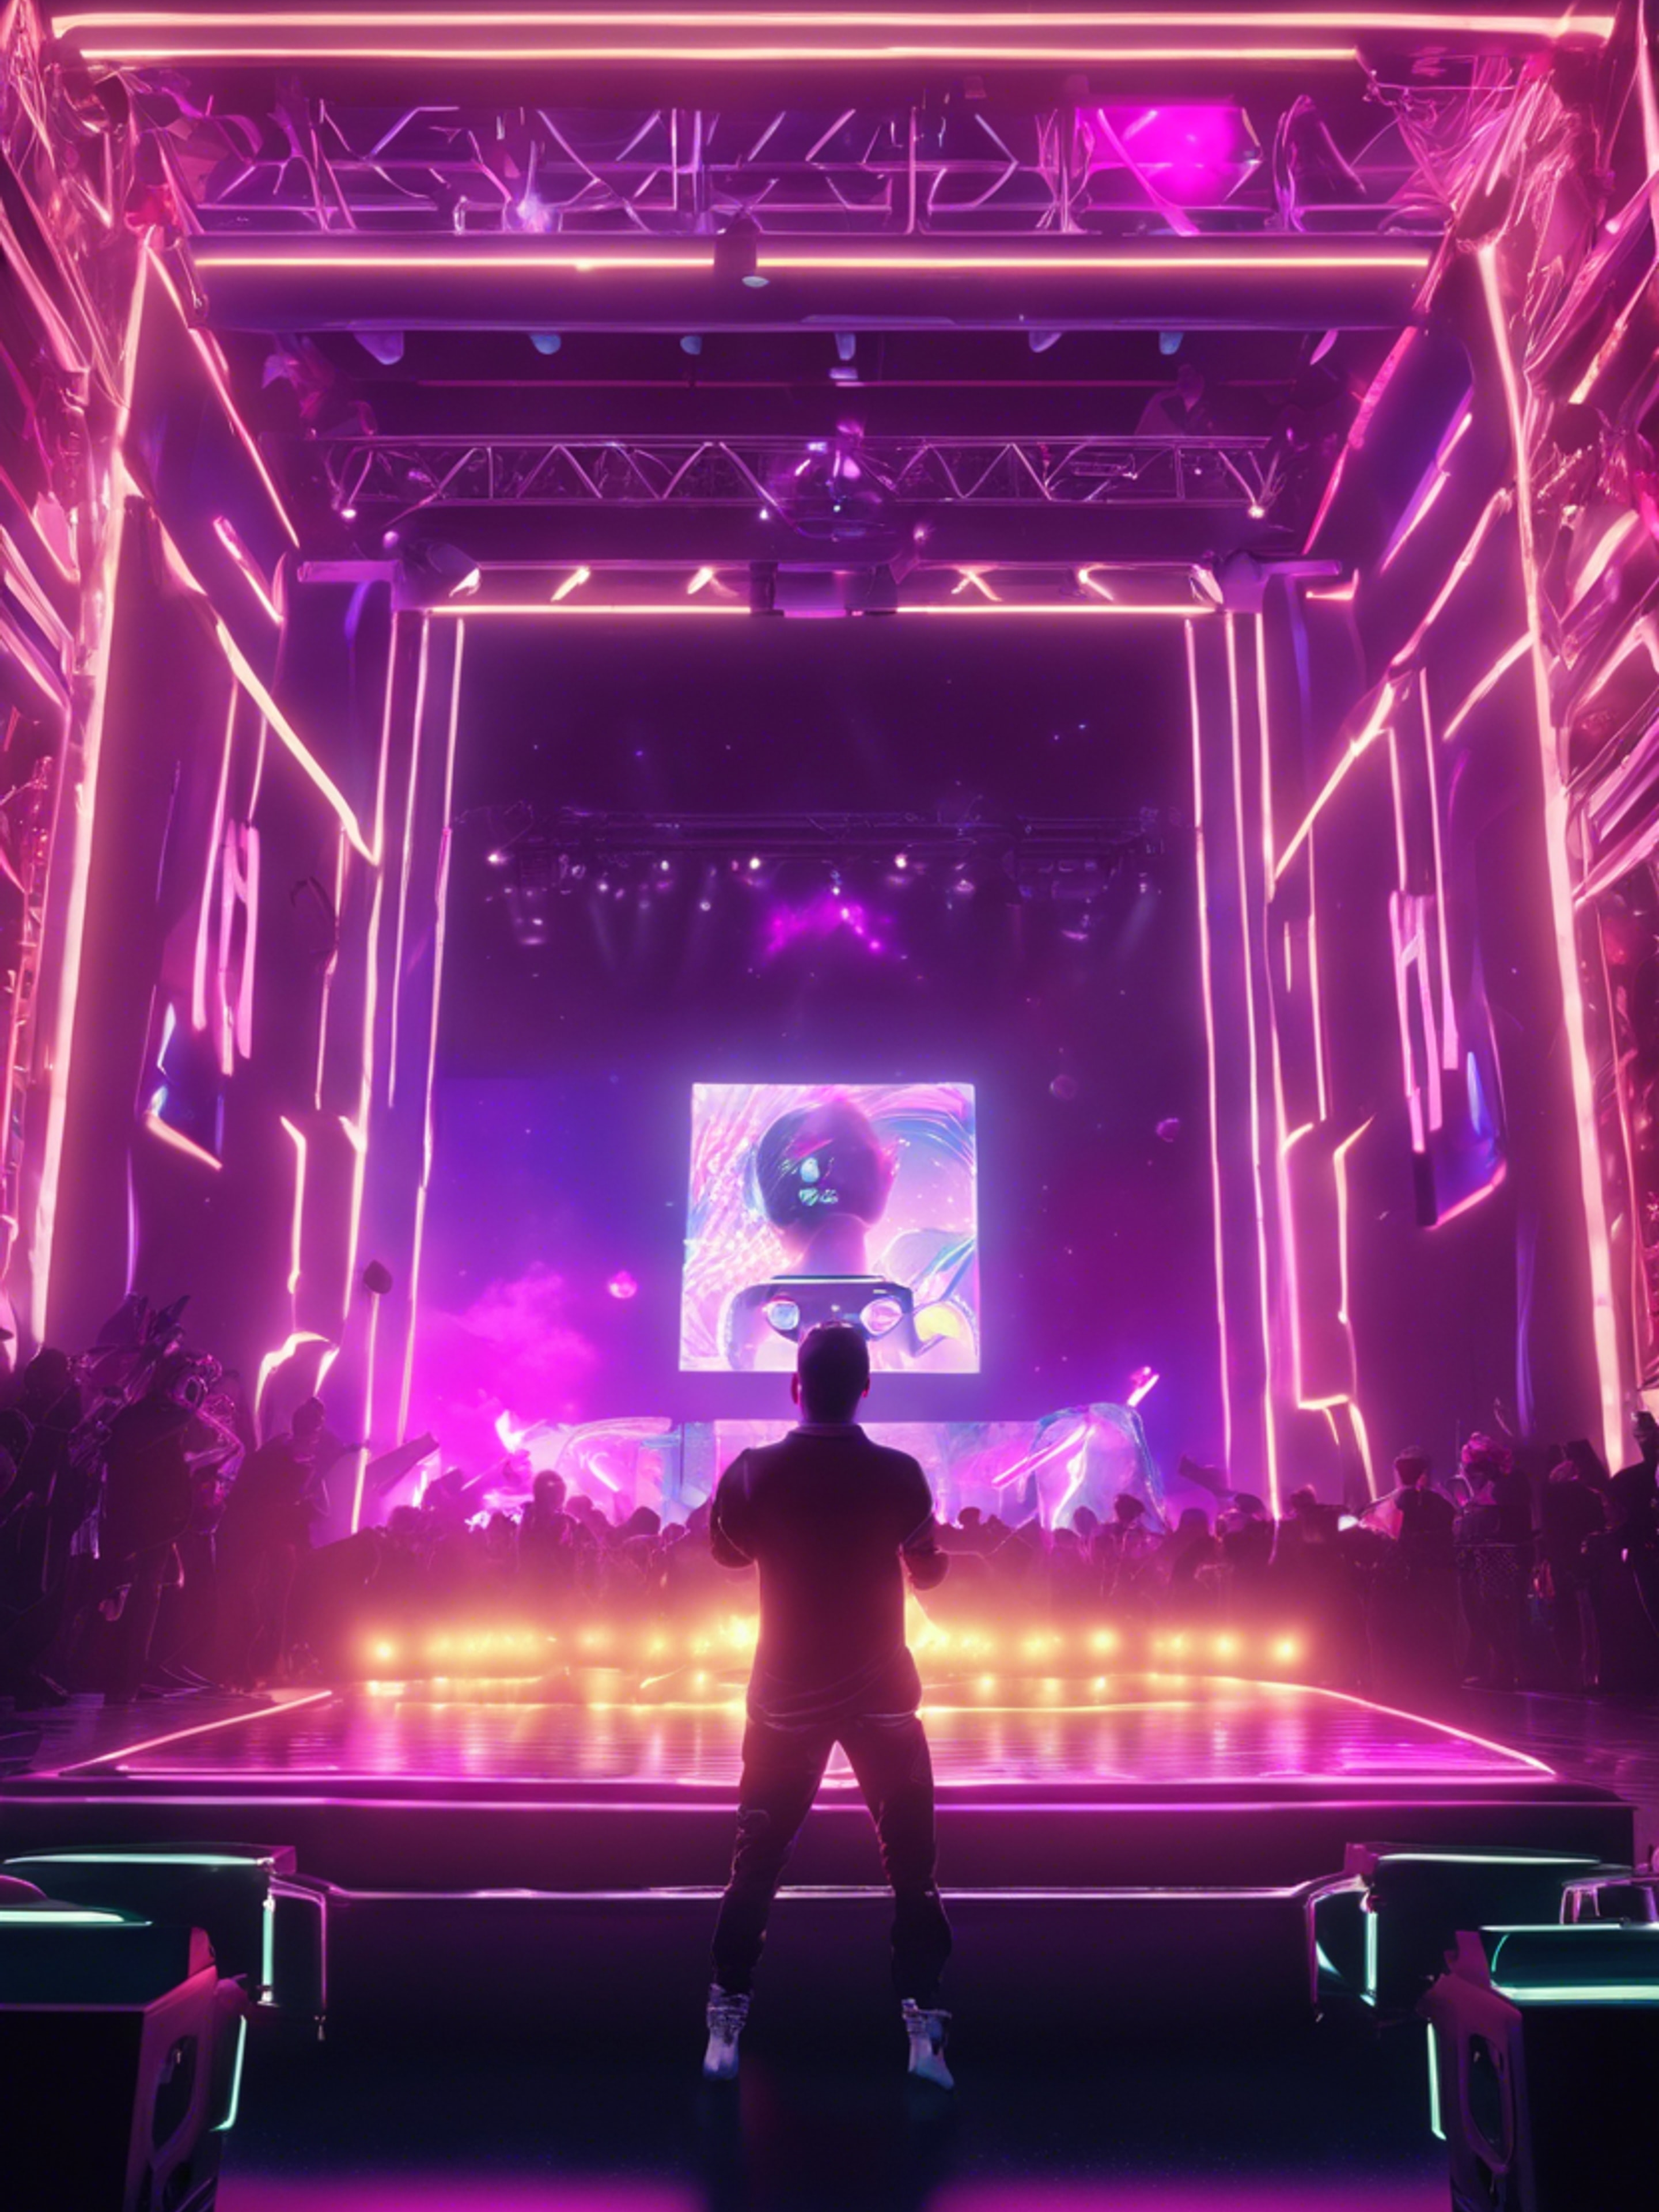 A virtual concert in a Y2K gaming environment, with neon spotlights showcasing a digital avatar performing onstage. 벽지[570c0802add746f5a0b1]